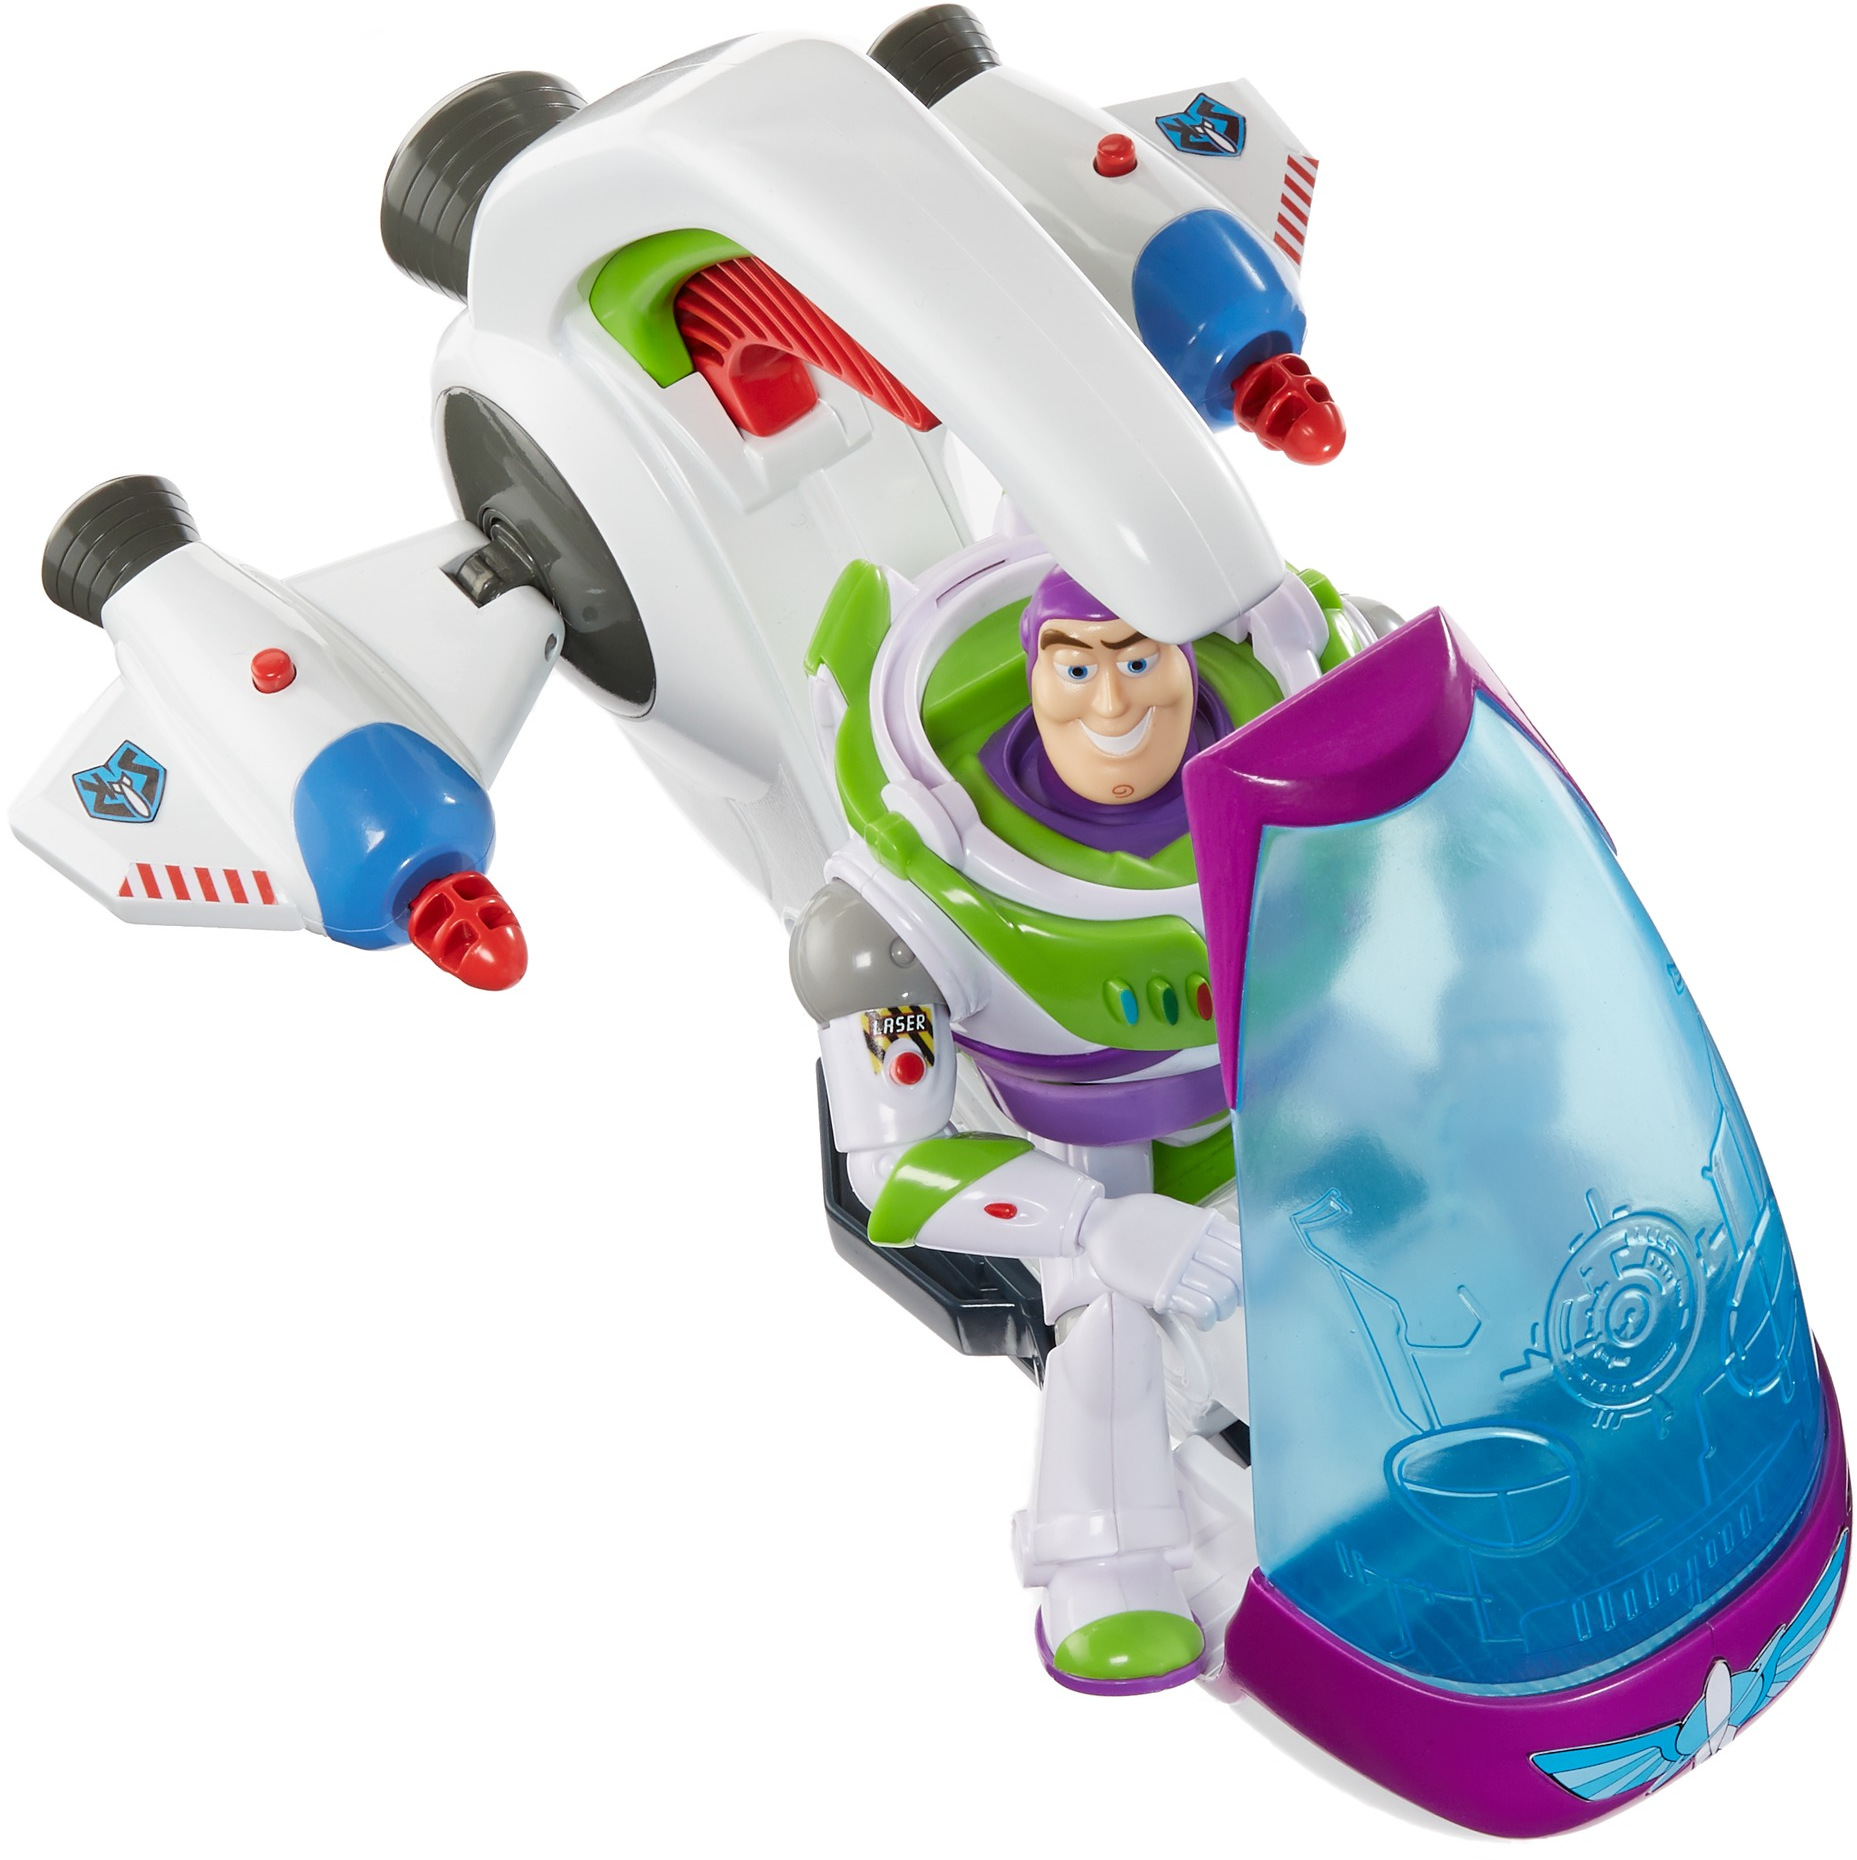 Disney Pixar Toy Story Galaxy Explorer Spacecraft Toy Vehicle For 4 Year Olds & Up - image 5 of 6